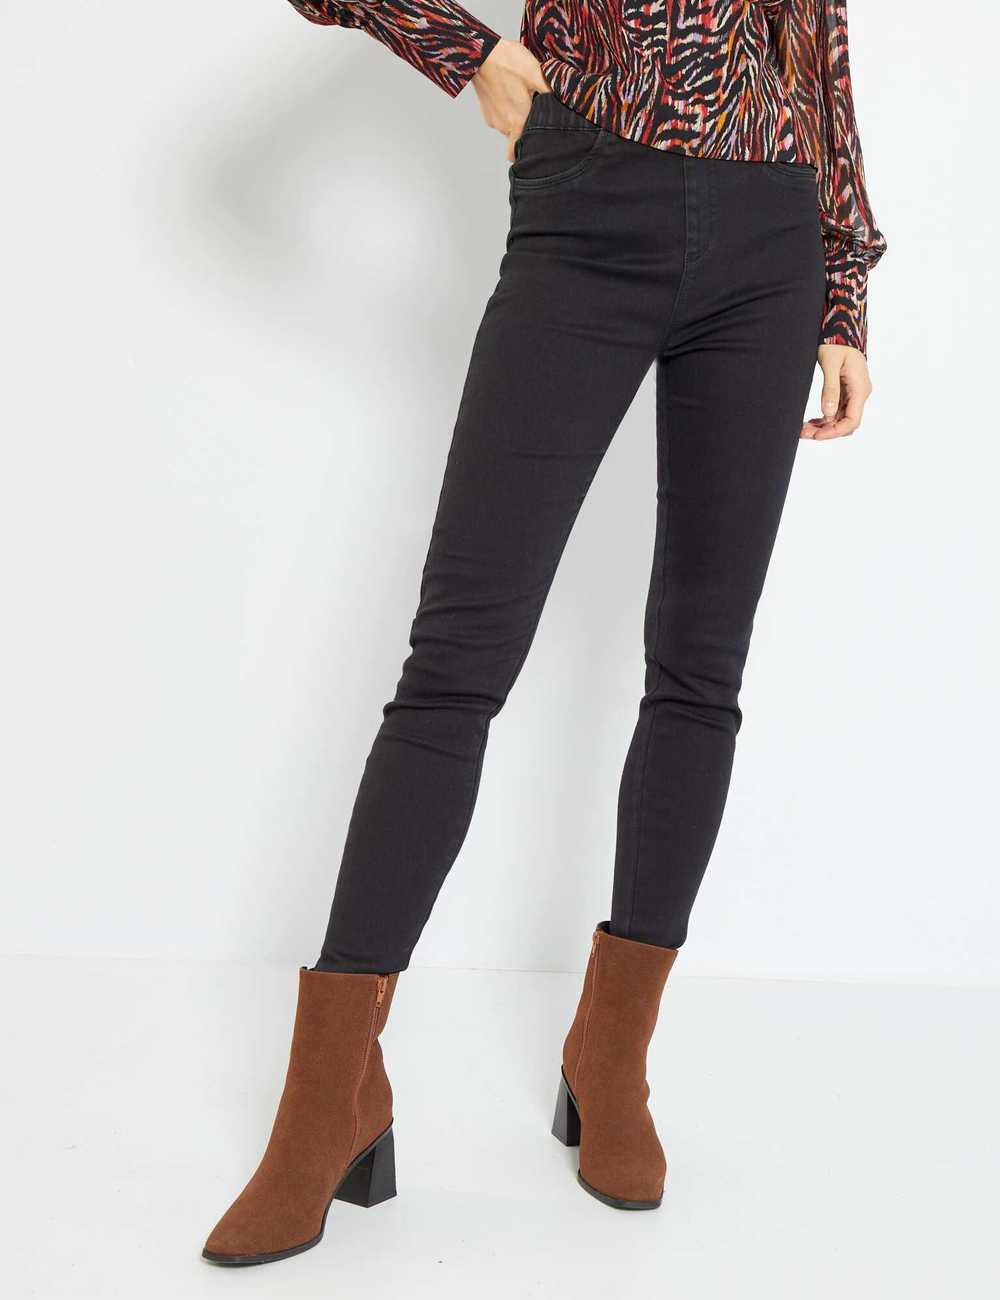 High-waisted stretch jeggings